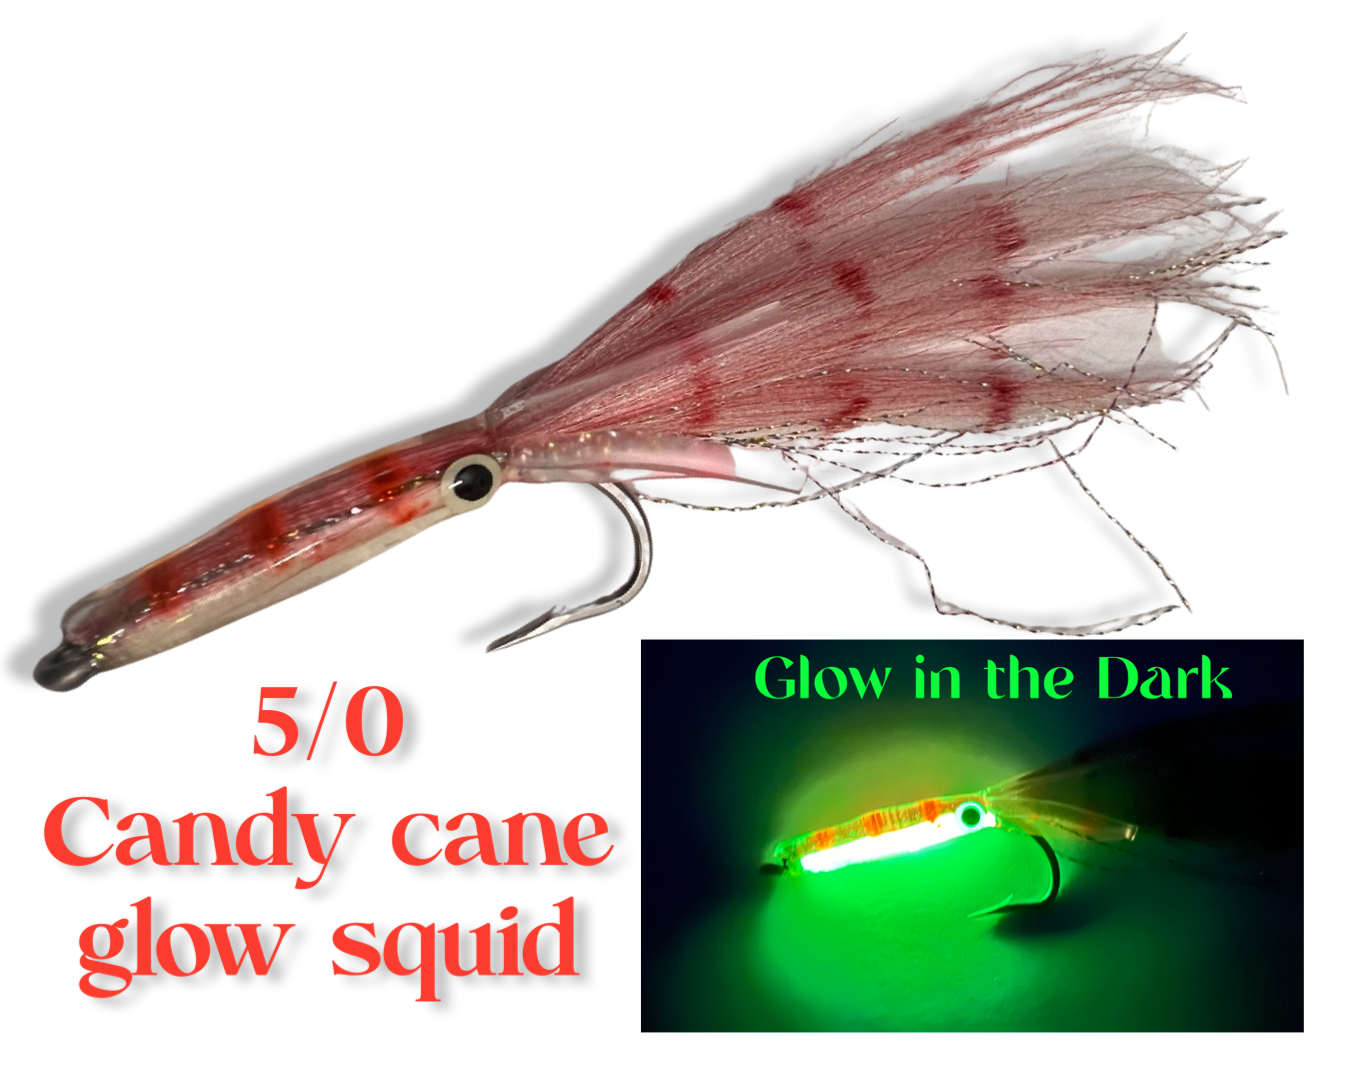 5/0 Glow in the Dark Candy cane Squid Fly